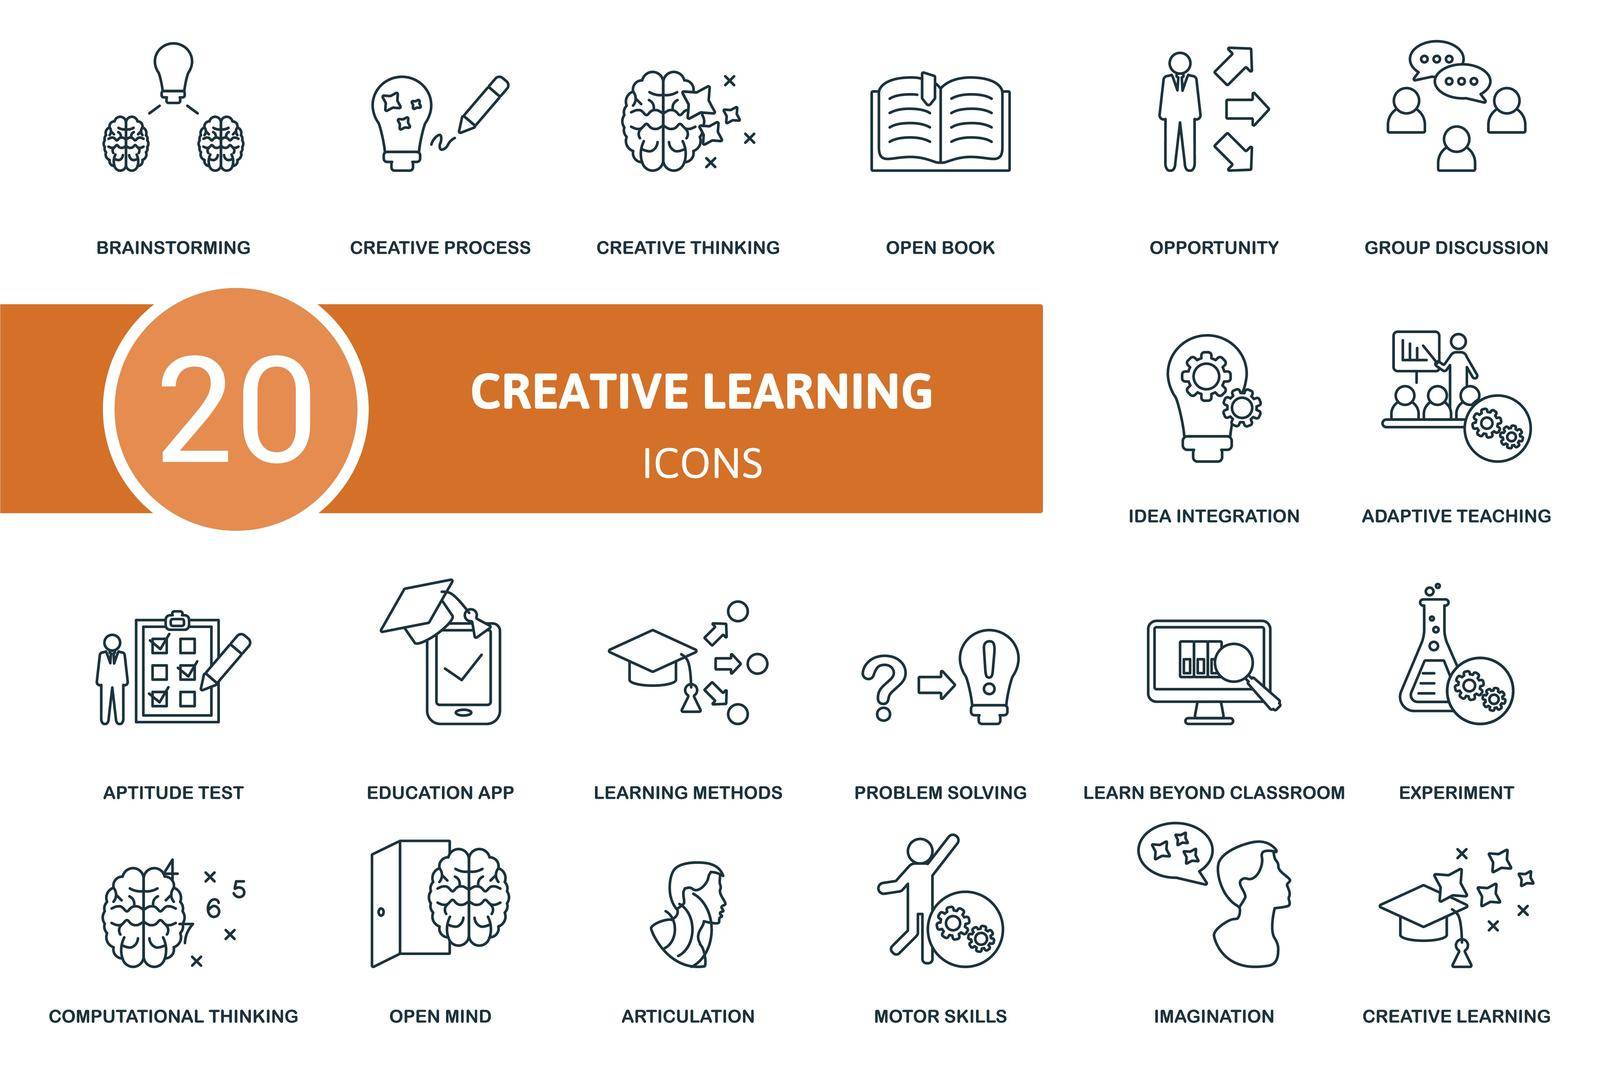 Creative Learning set icon. Contains creative learning illustrations such as creative process, open book, group discussion and more